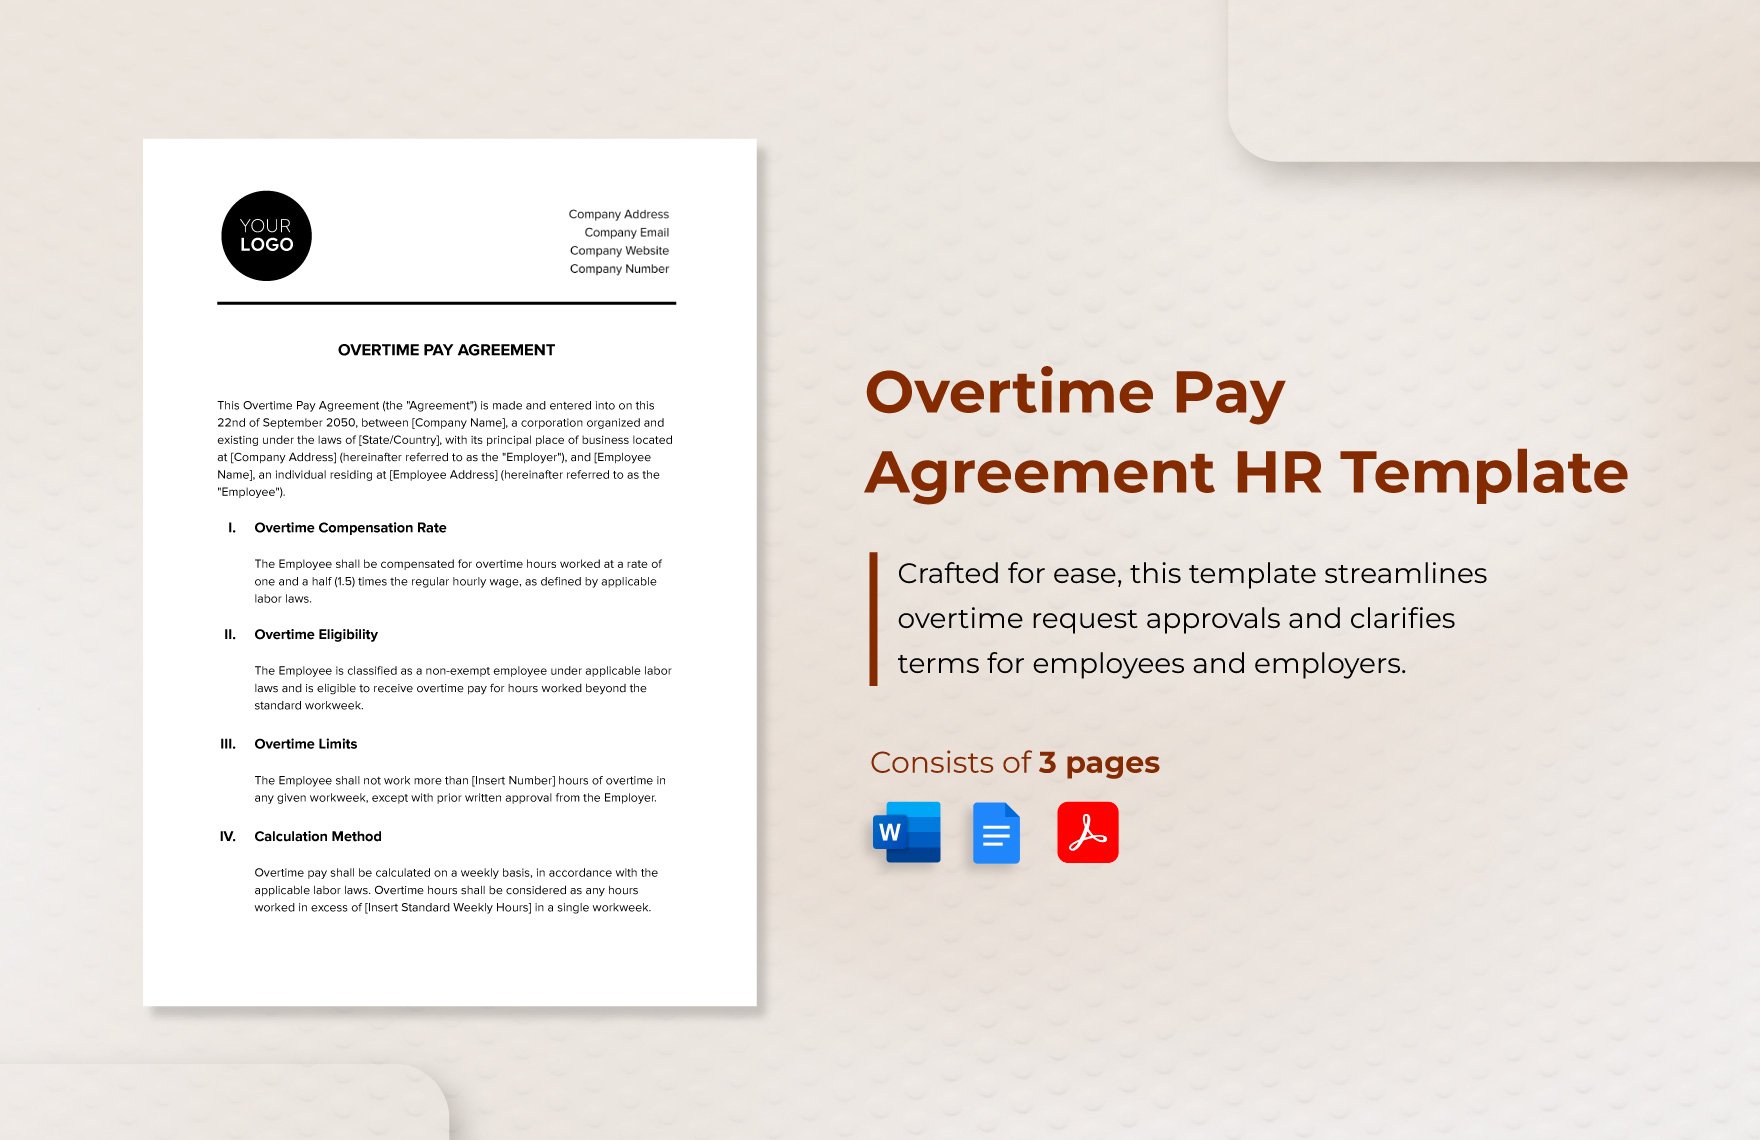 Overtime Pay Agreement HR Template in Word, Google Docs, PDF